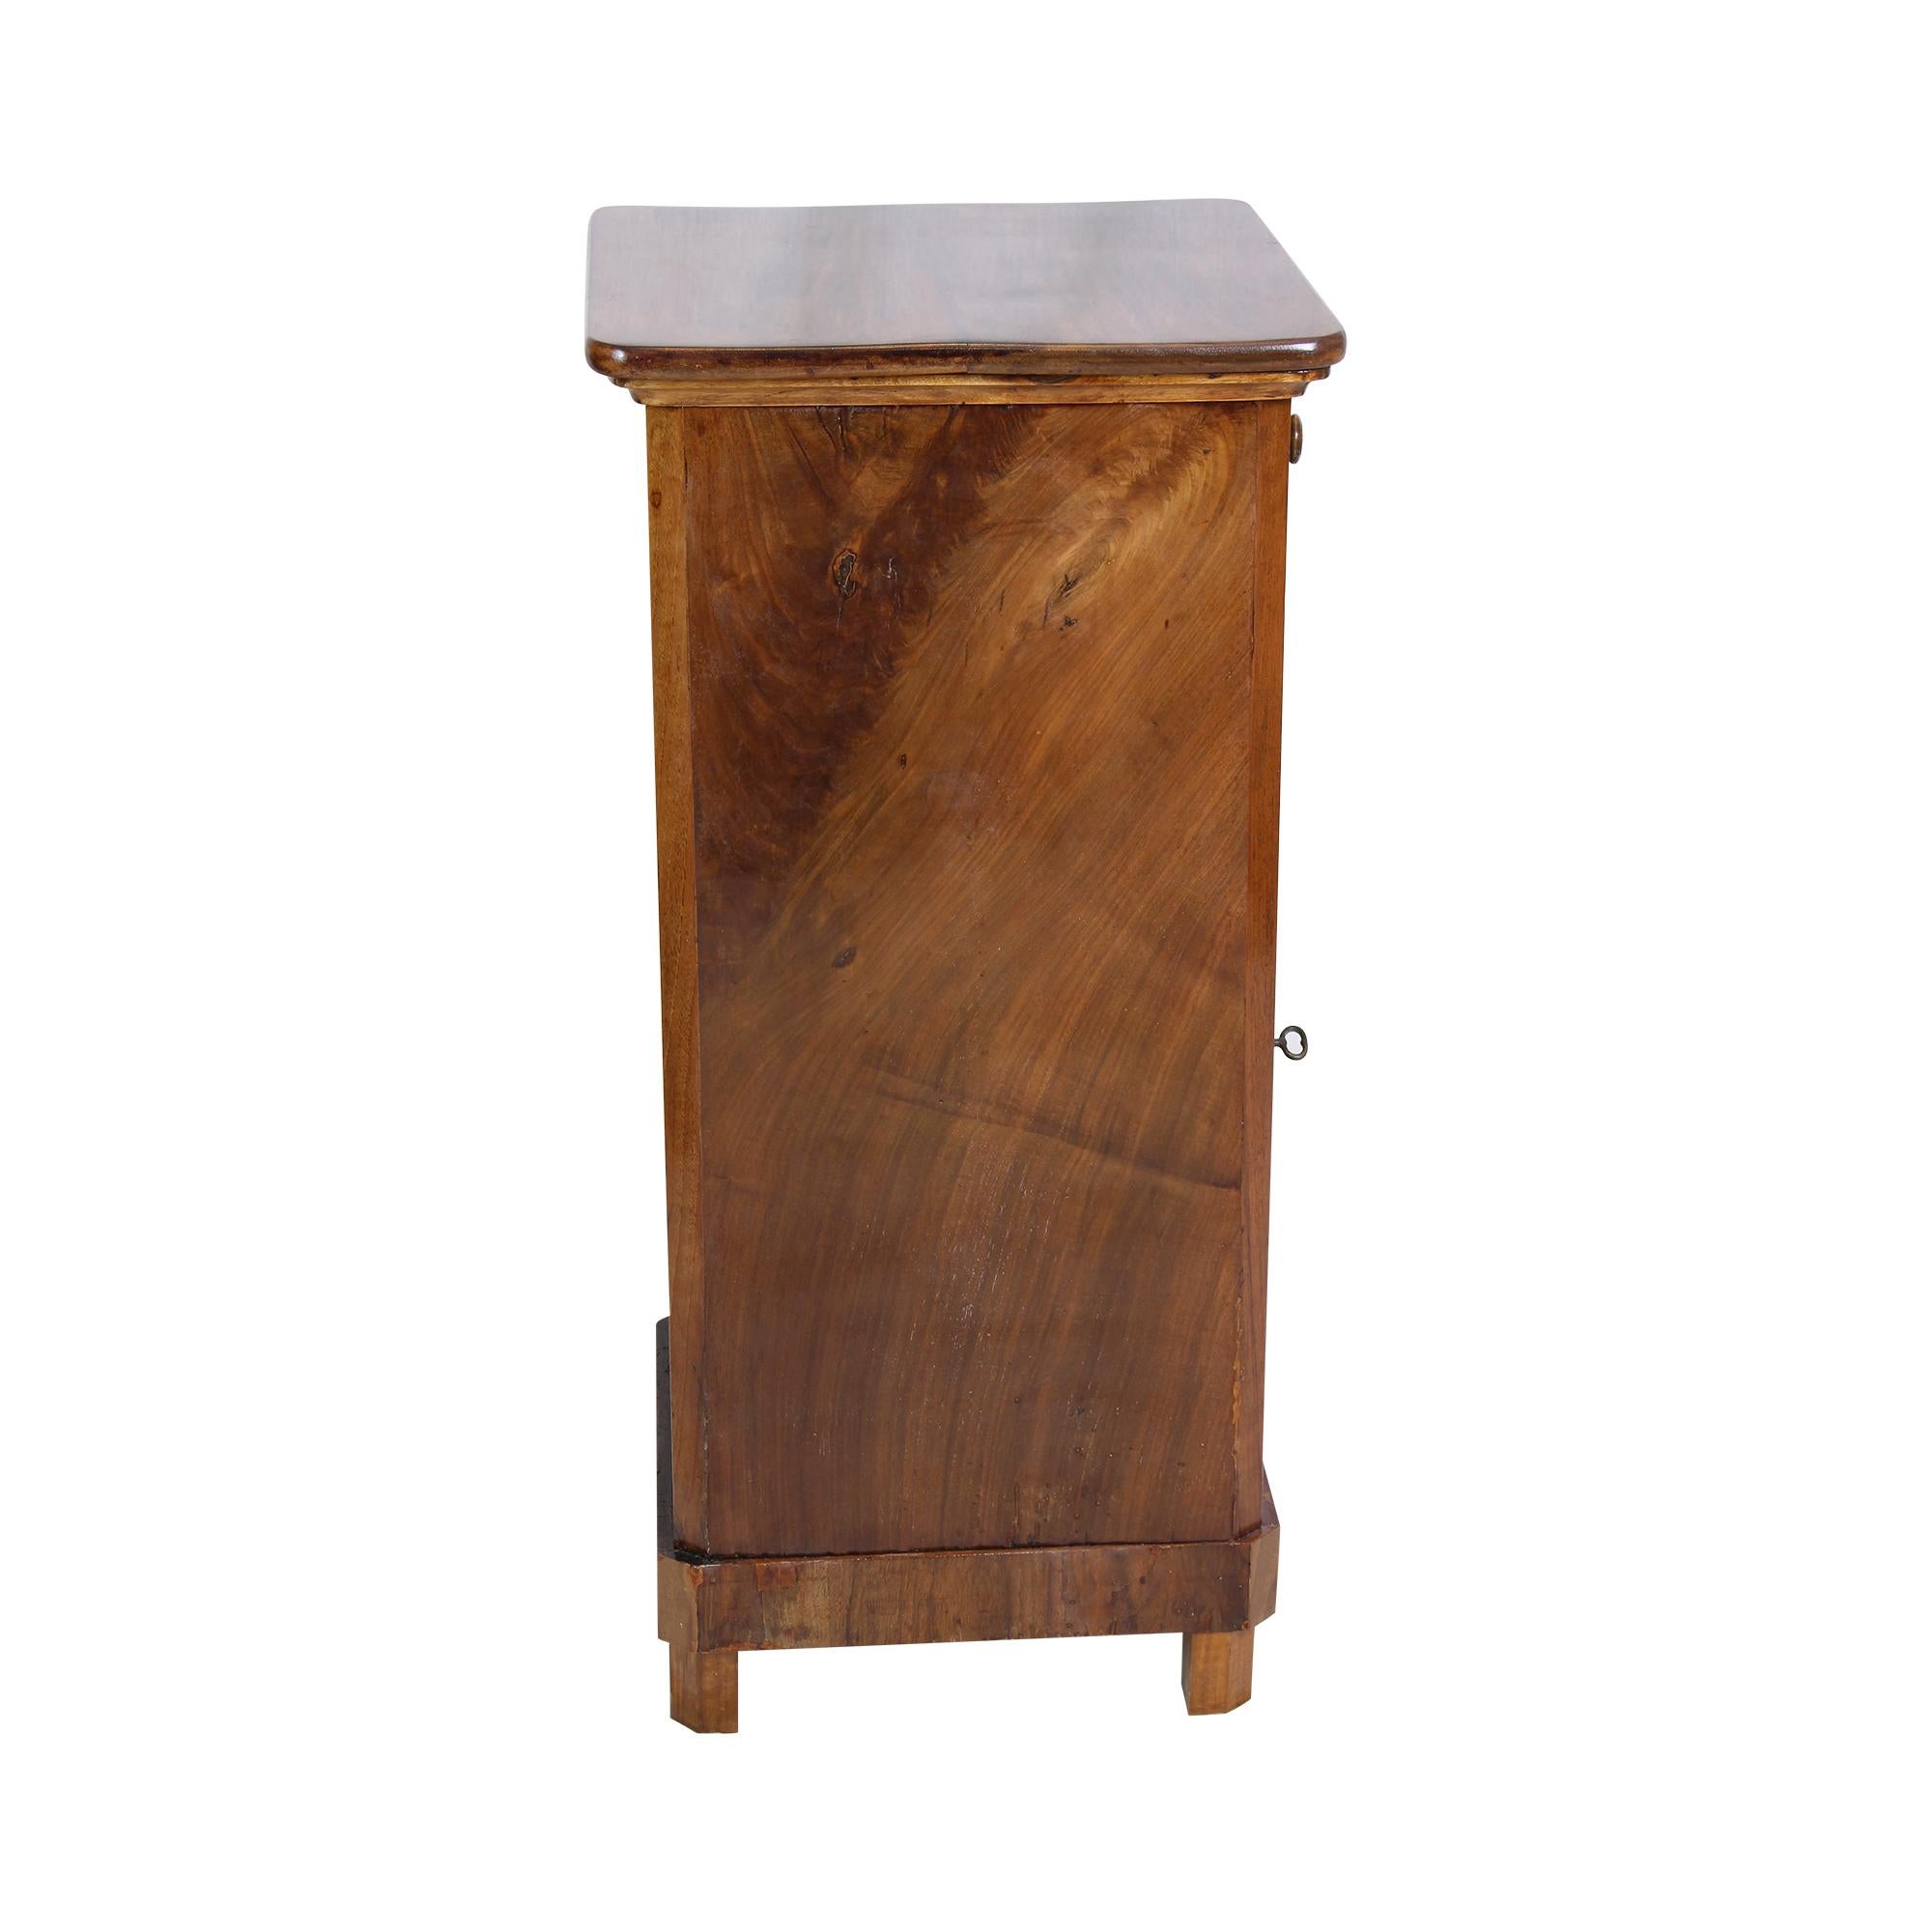 Beautiful Biedermeier bedside table in walnut veneer on softwood from Germany. There is a drawer at the top and a door at the bottom. The piece of furniture can be placed on its own as the back is also veneered. The furniture is in a very good,